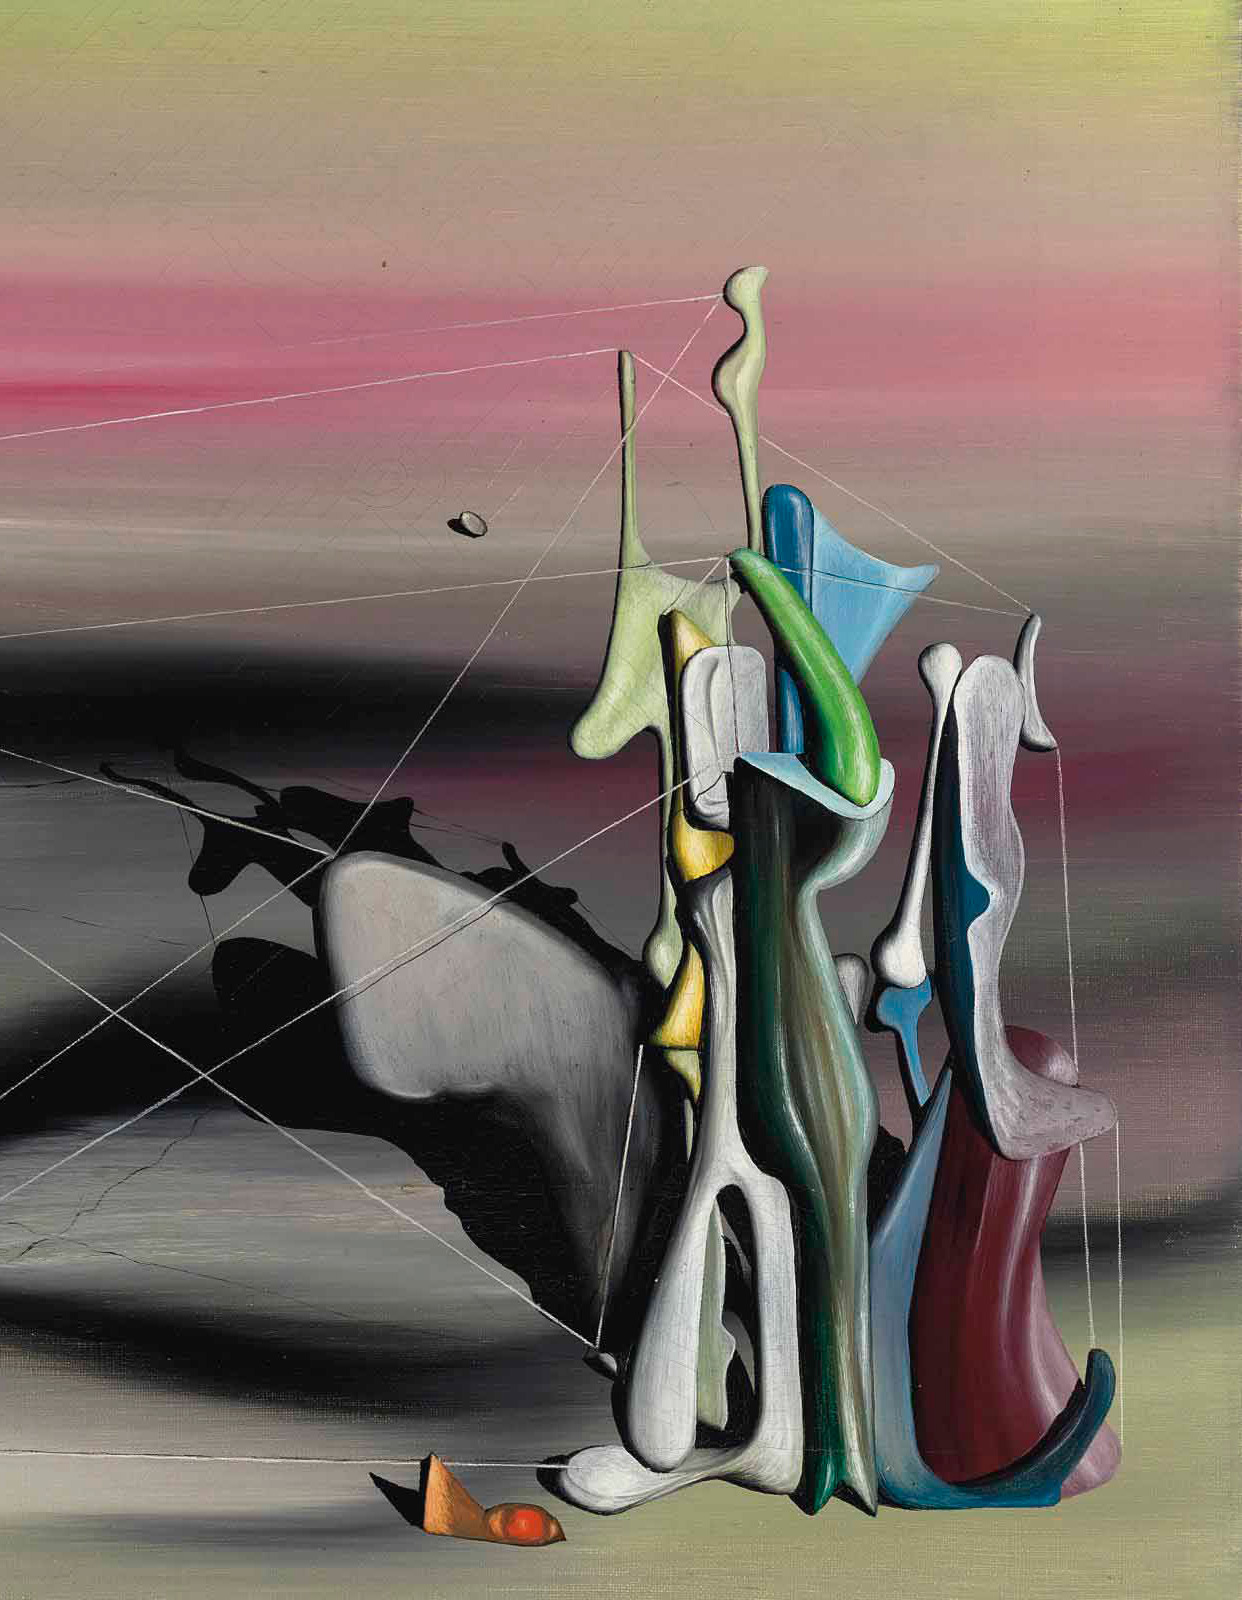 Abstract Figures — Themes In Art Obelisk Art History